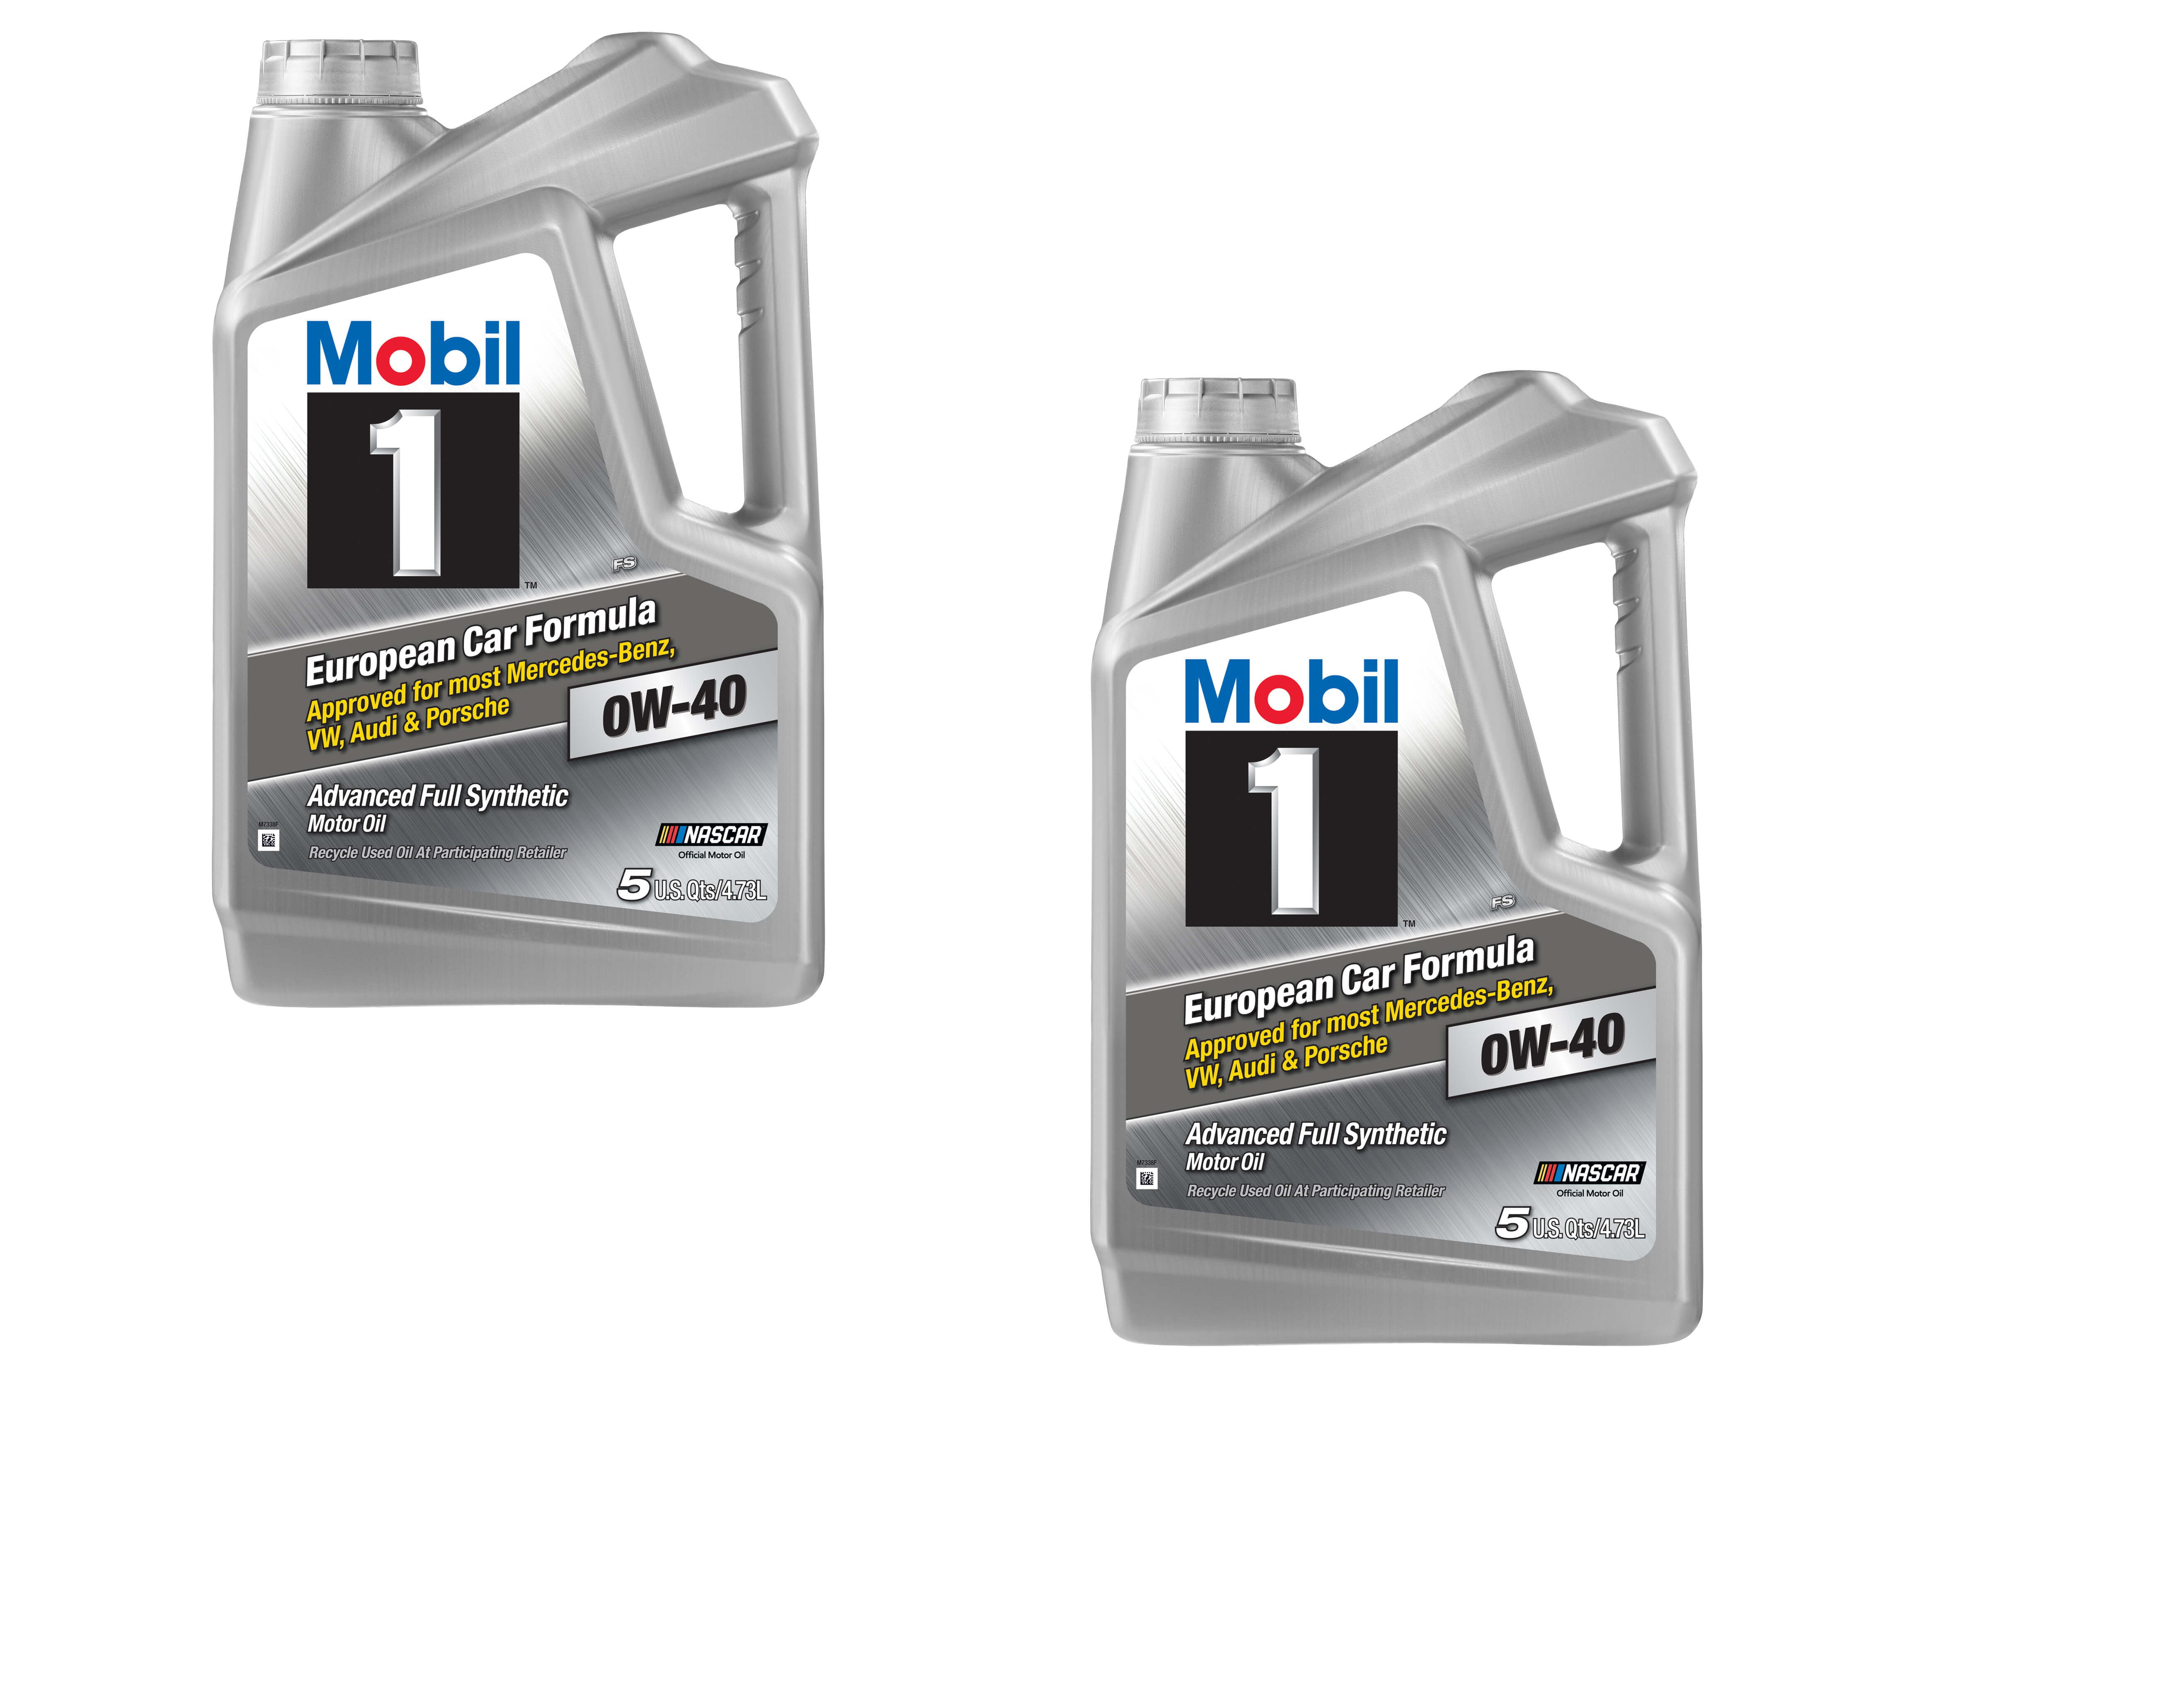 Mobil 1 0w 40. Mobil Advanced Full Synthetic 0w40. Mobil 1 European car Formula 0w-40. Mobil 1 FS European car Full Synthetic 0w40 Oil.. Mobil 1 FS 0w-40.